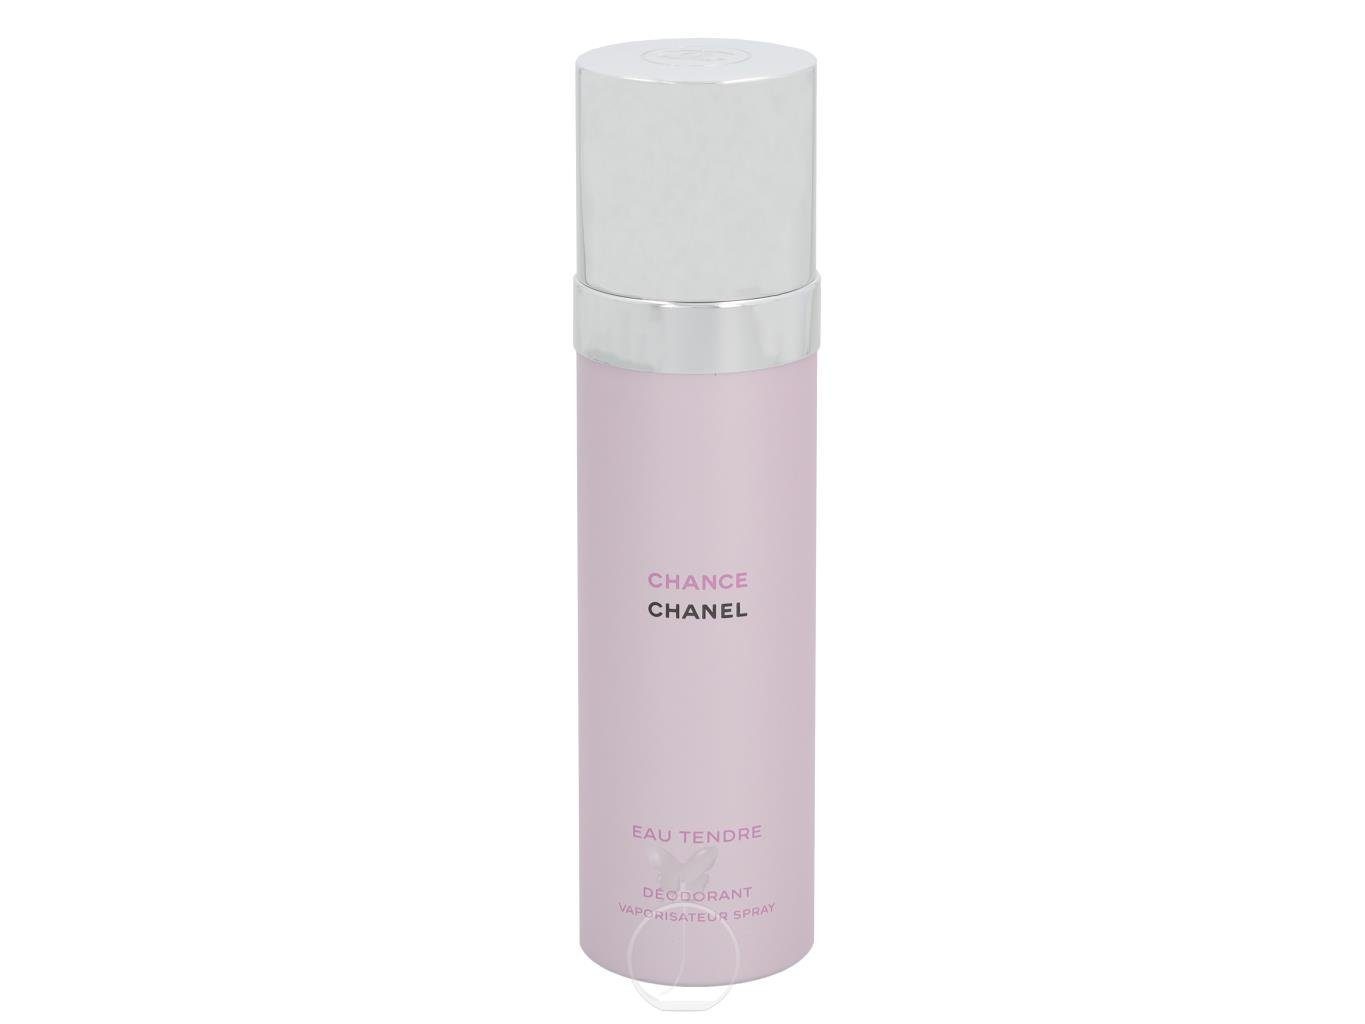 WOMENS CHANEL CHANCE EAU TENDRE PERFUME SCENTED BODY DEODORANT